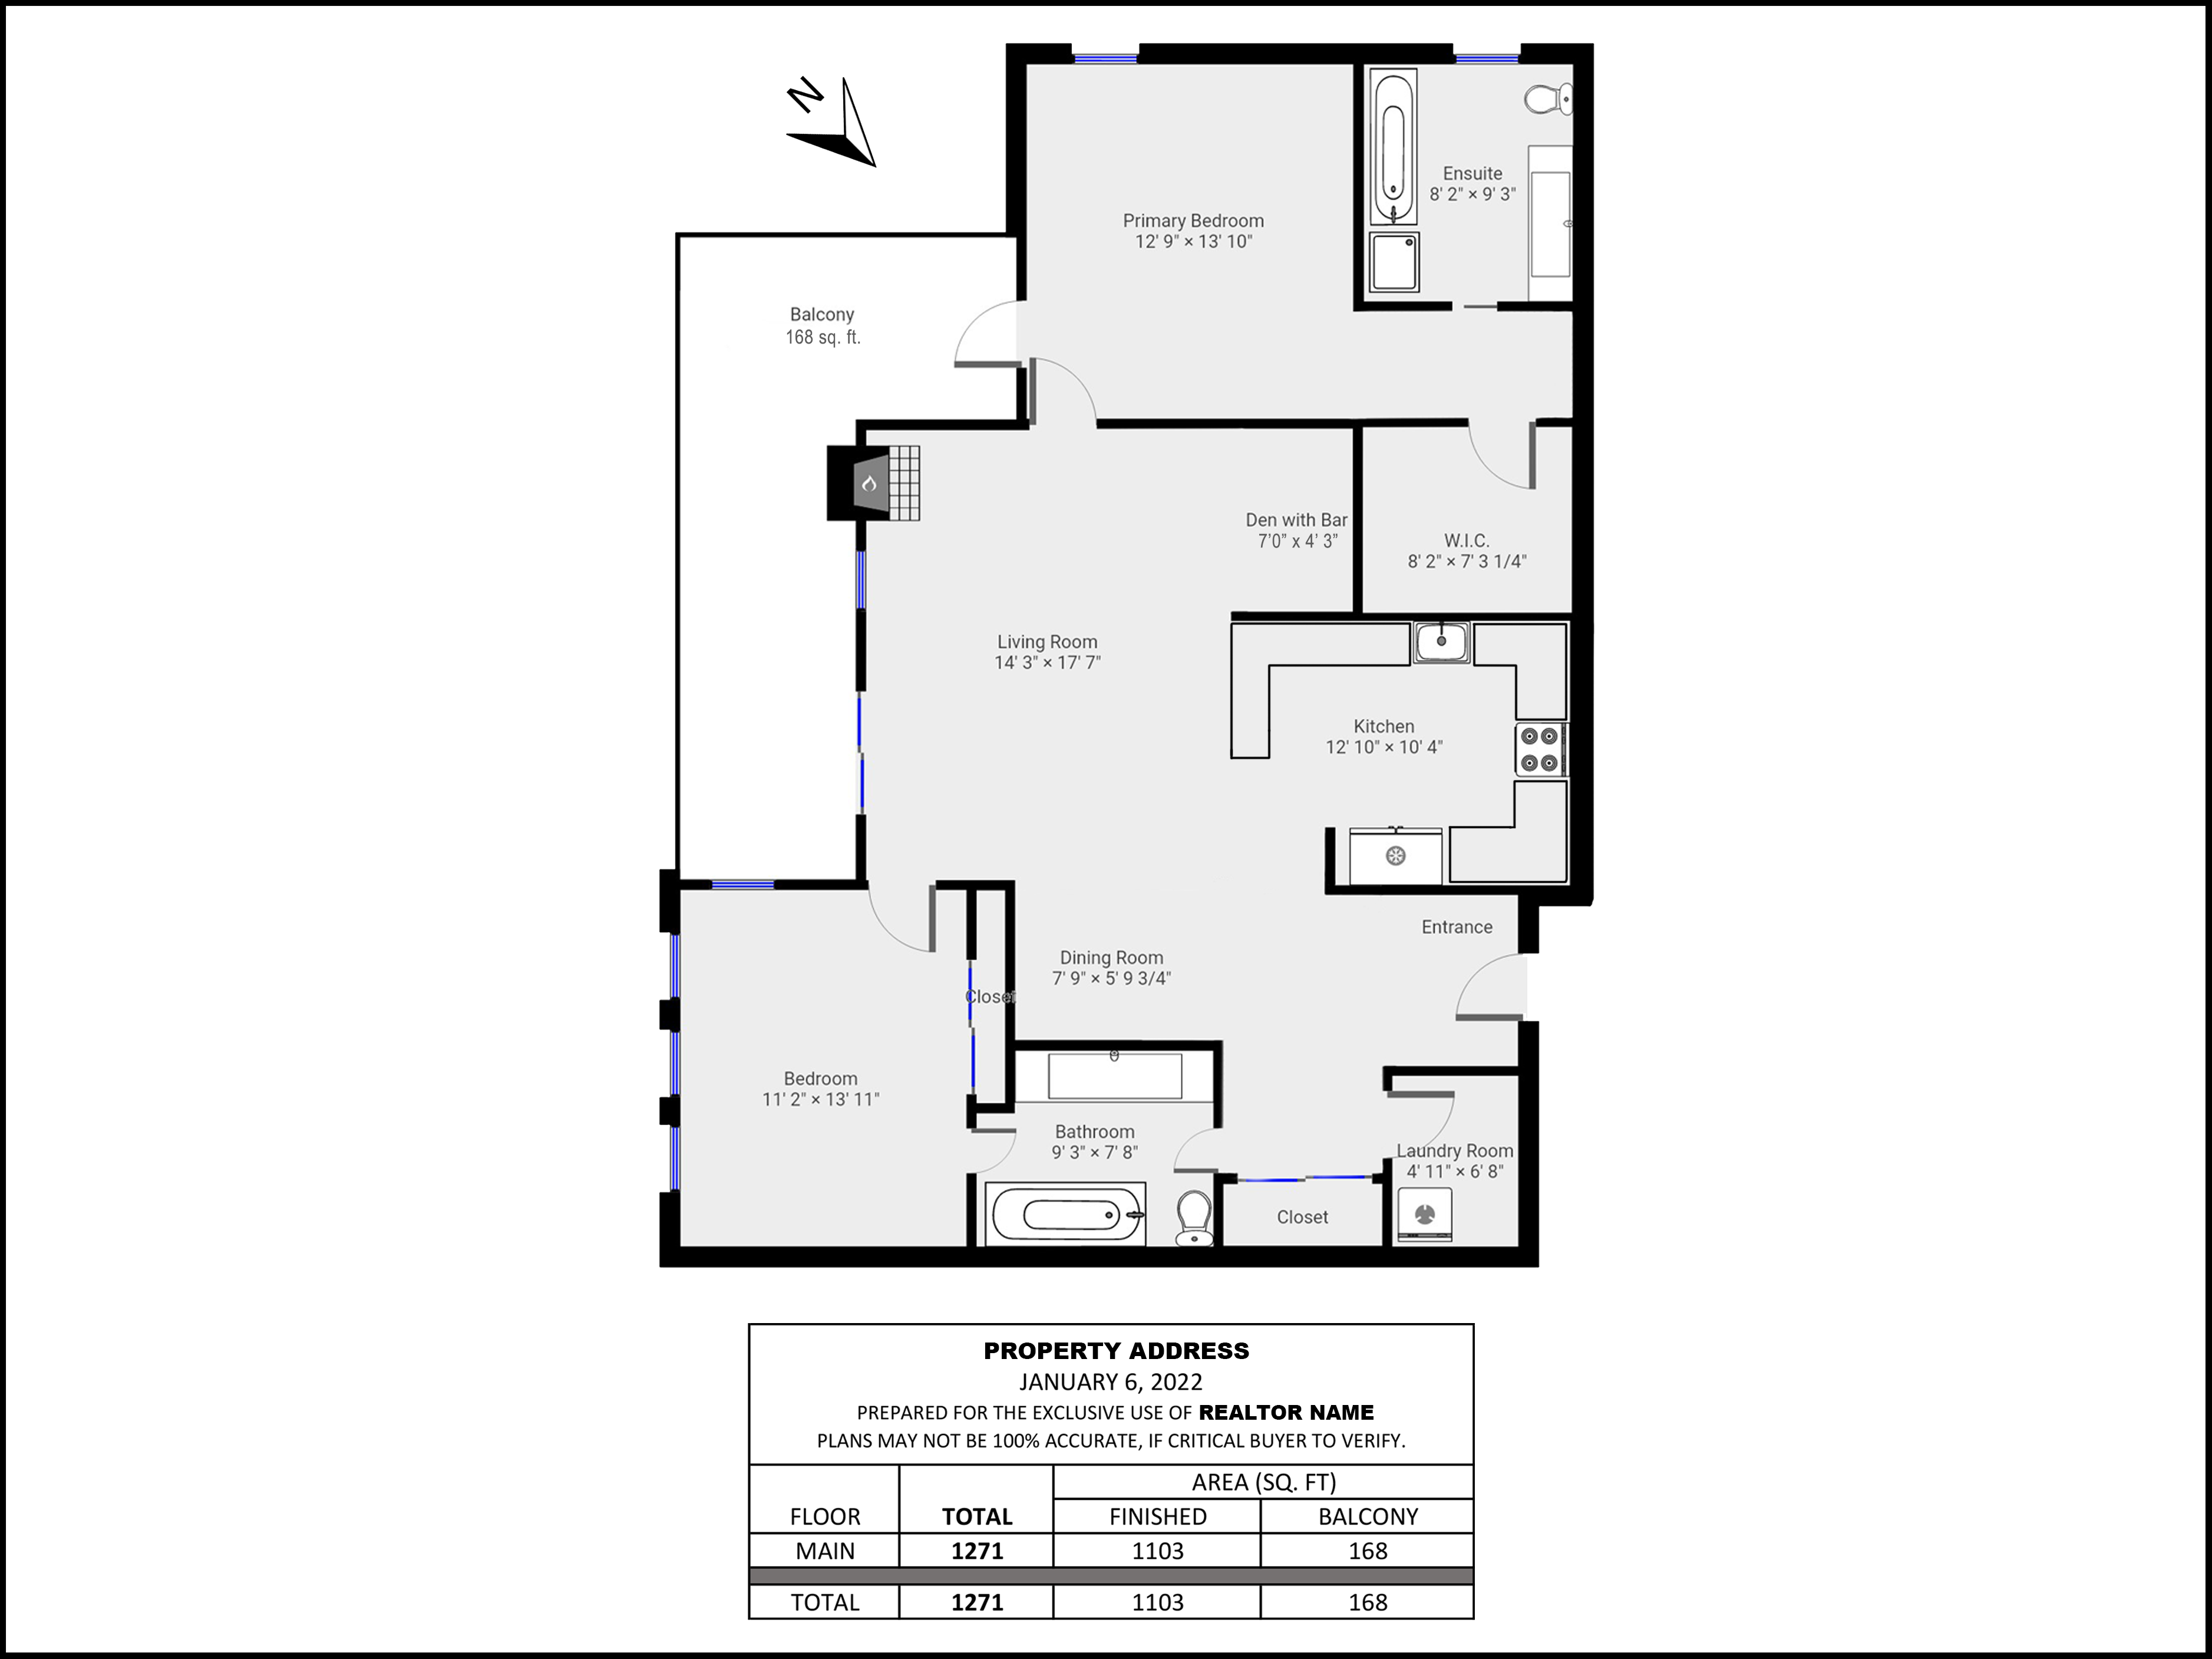 Floor plan in black and white with measurements